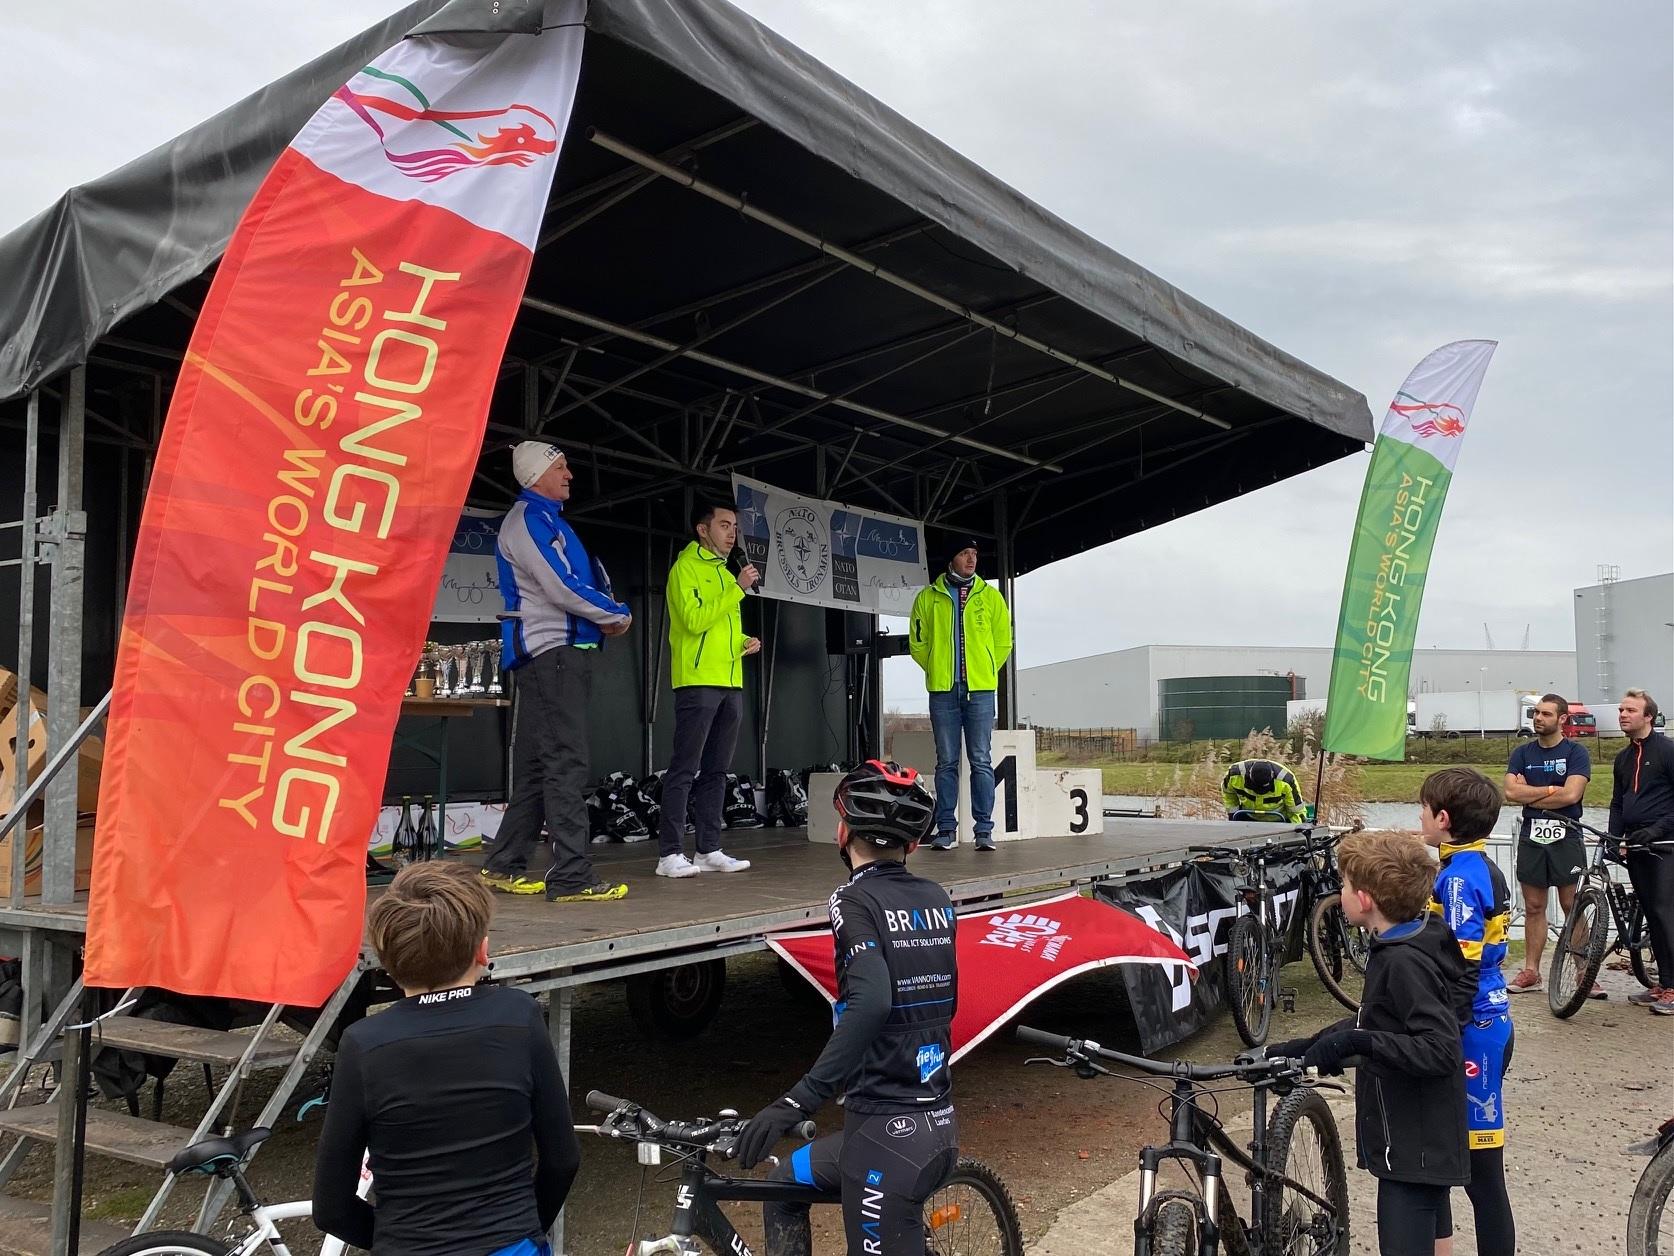 The Acting Deputy Representative of the HKETO, Brussels, Mr Henry Tsoi,  (centre, back row) speaks at the opening of the Run & Bike sports event in Vilvoorde, Belgium on January 8 (Brussels time).